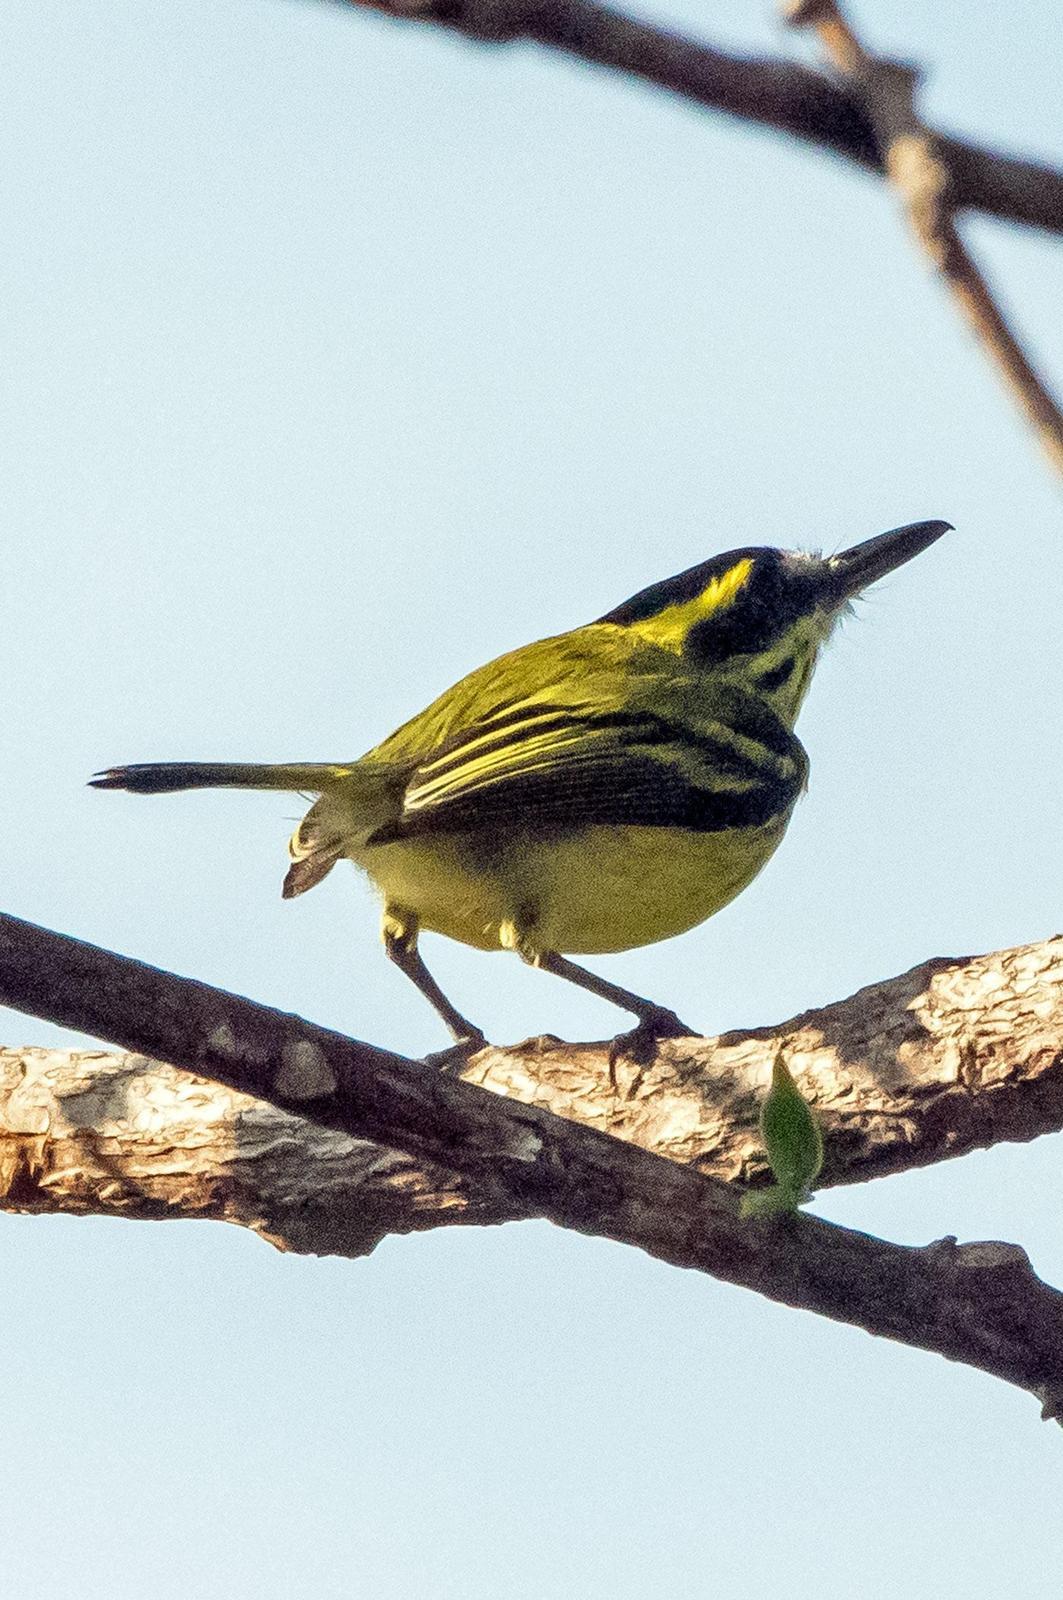 Yellow-browed Tody-Flycatcher Photo by Phil Kahler